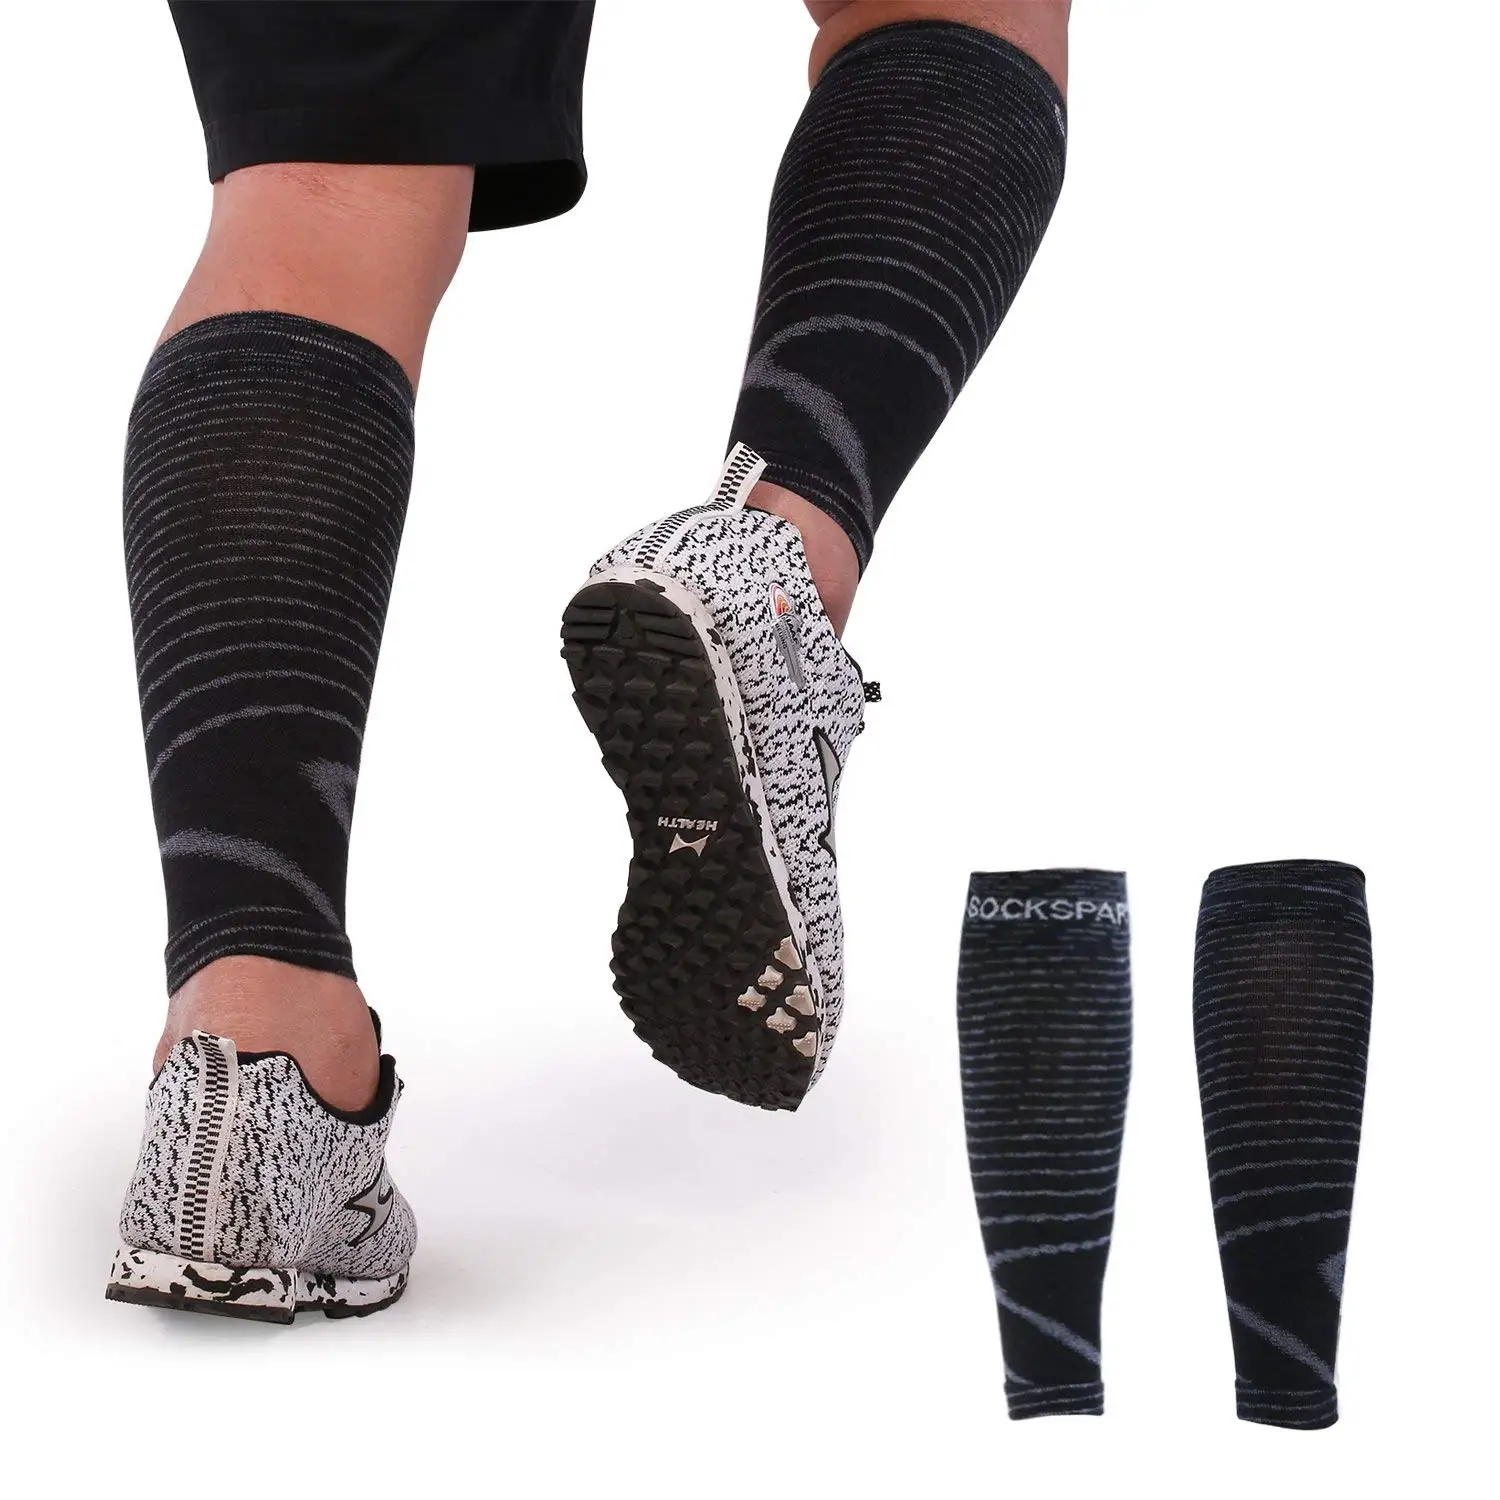 under armour compression leg sleeves